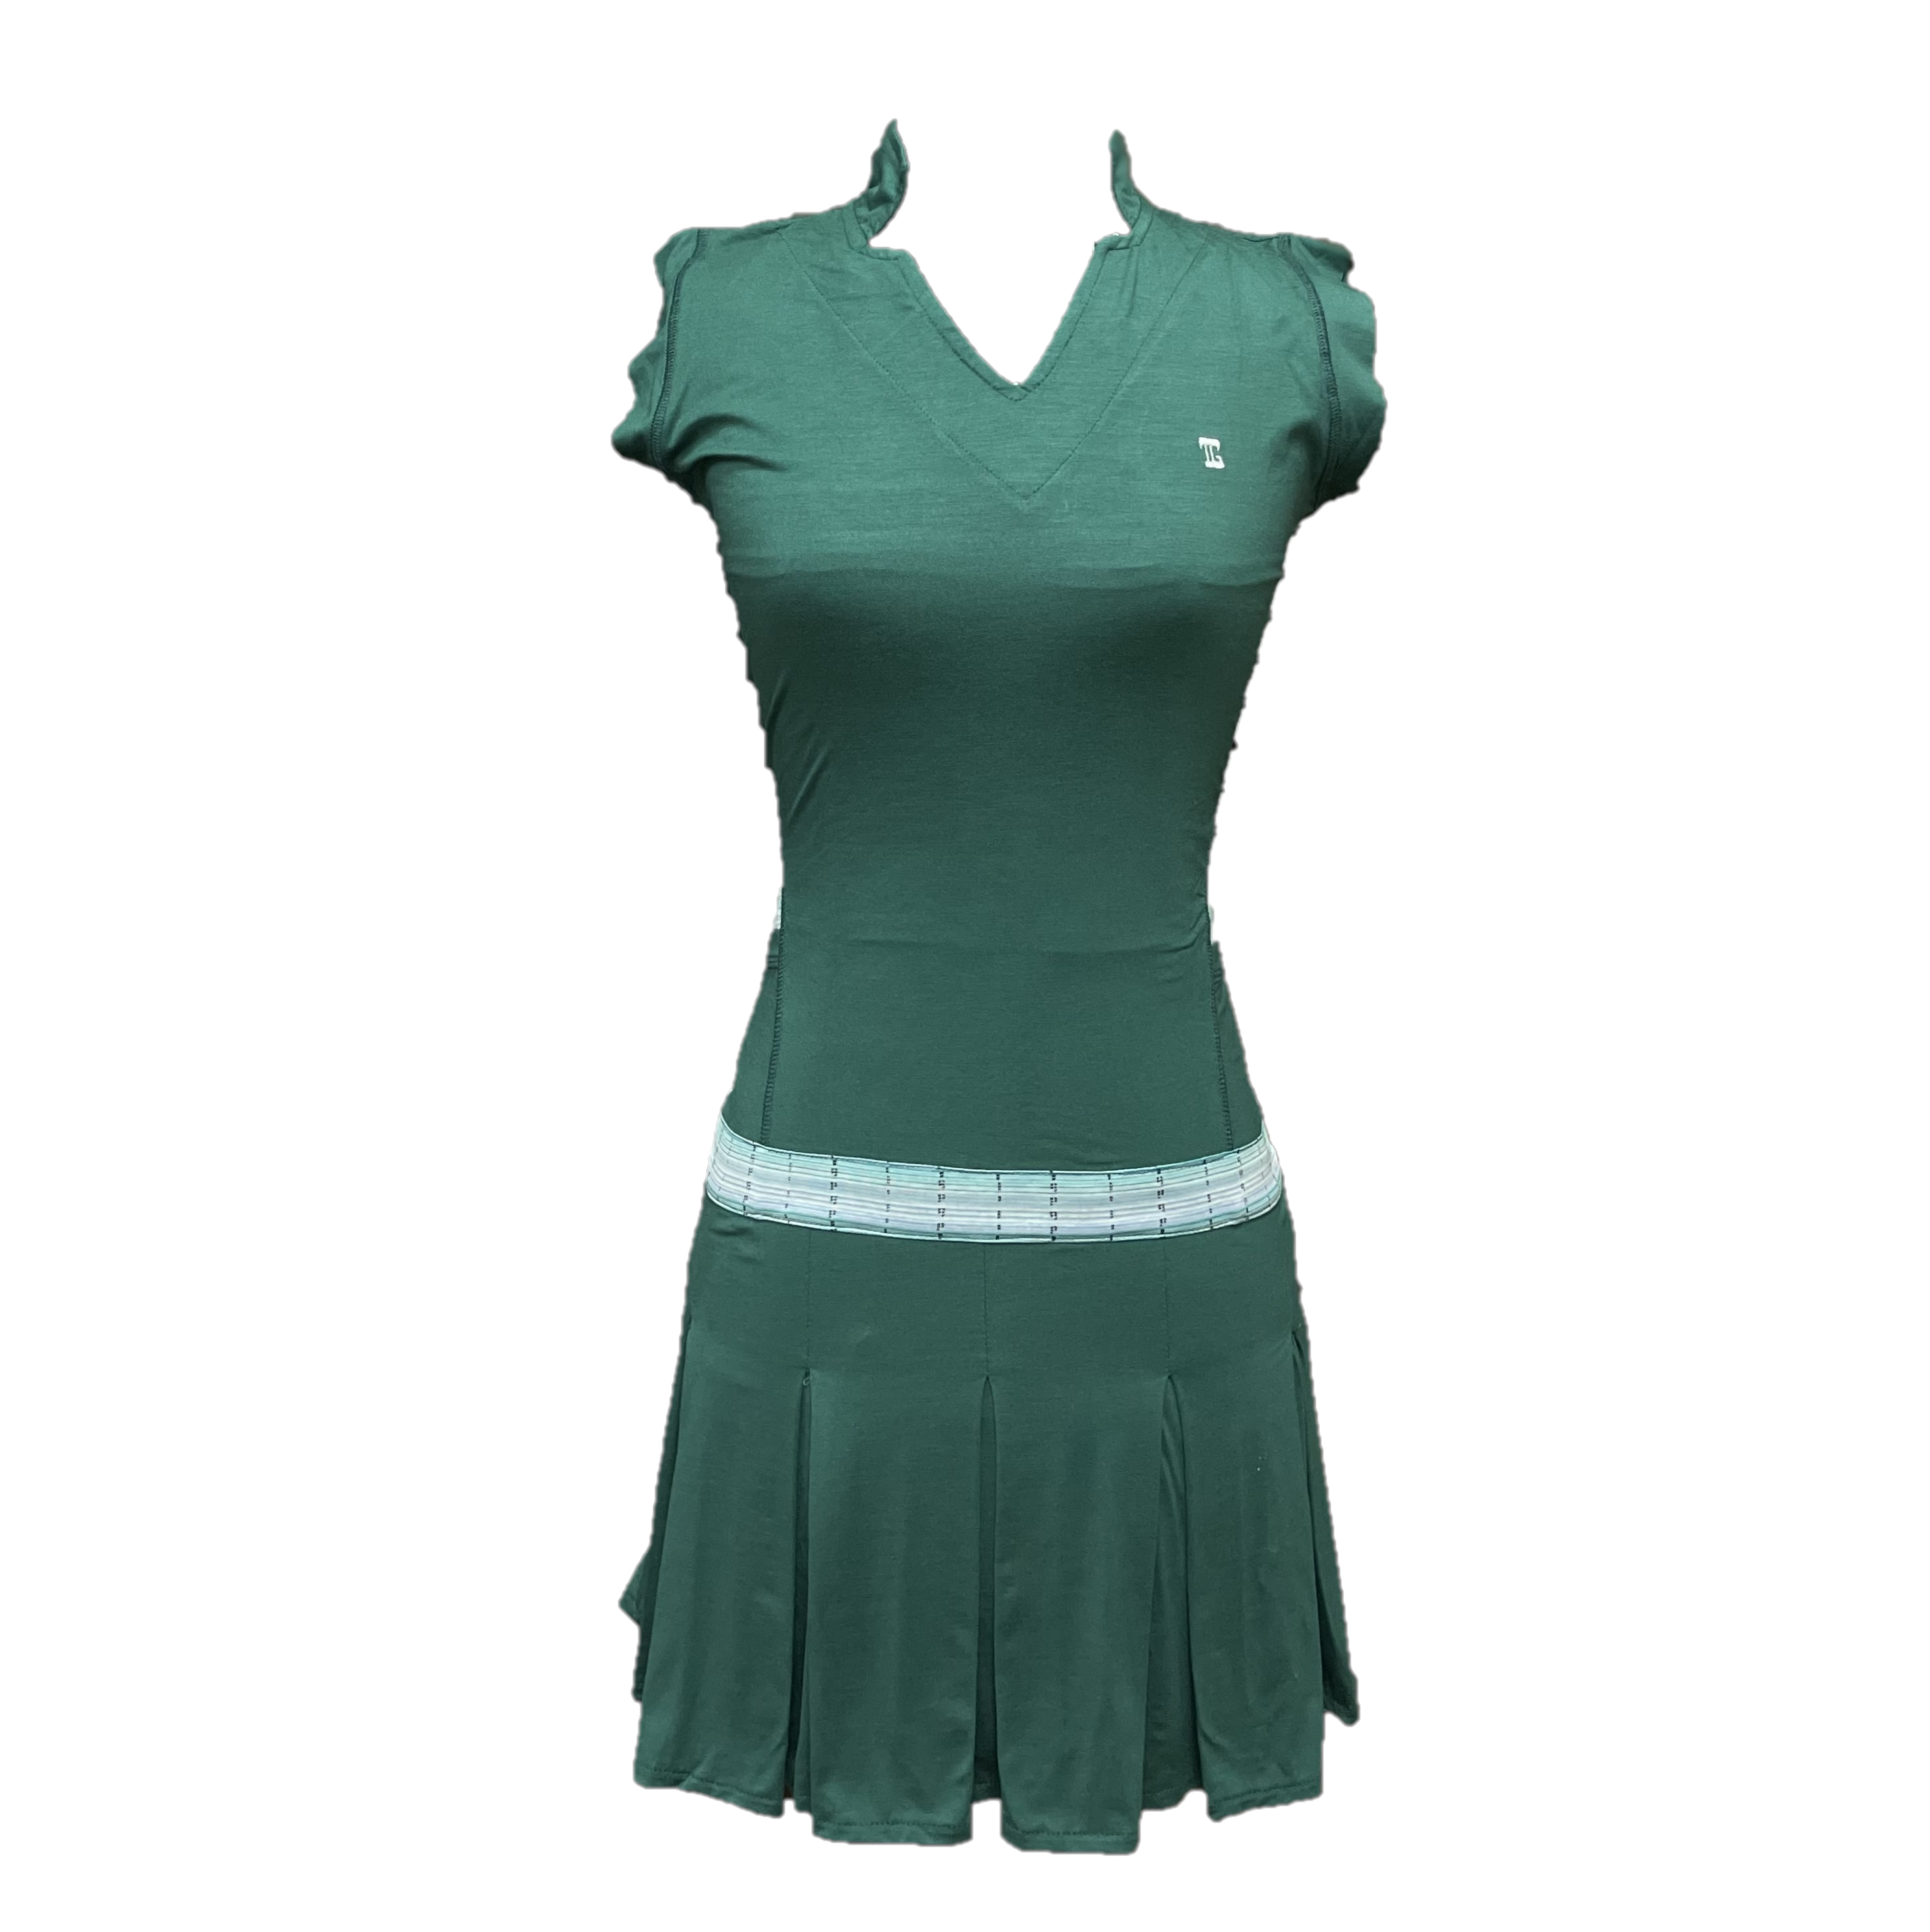 GD-026 || Golf Dress Dark Green Open V Neck Mandarin Collar Pleated Swing Hem with White and Green Fine Striped Motif Breathable Underarm and Hip trim Panels, 2 Side Pockets Sleeveless